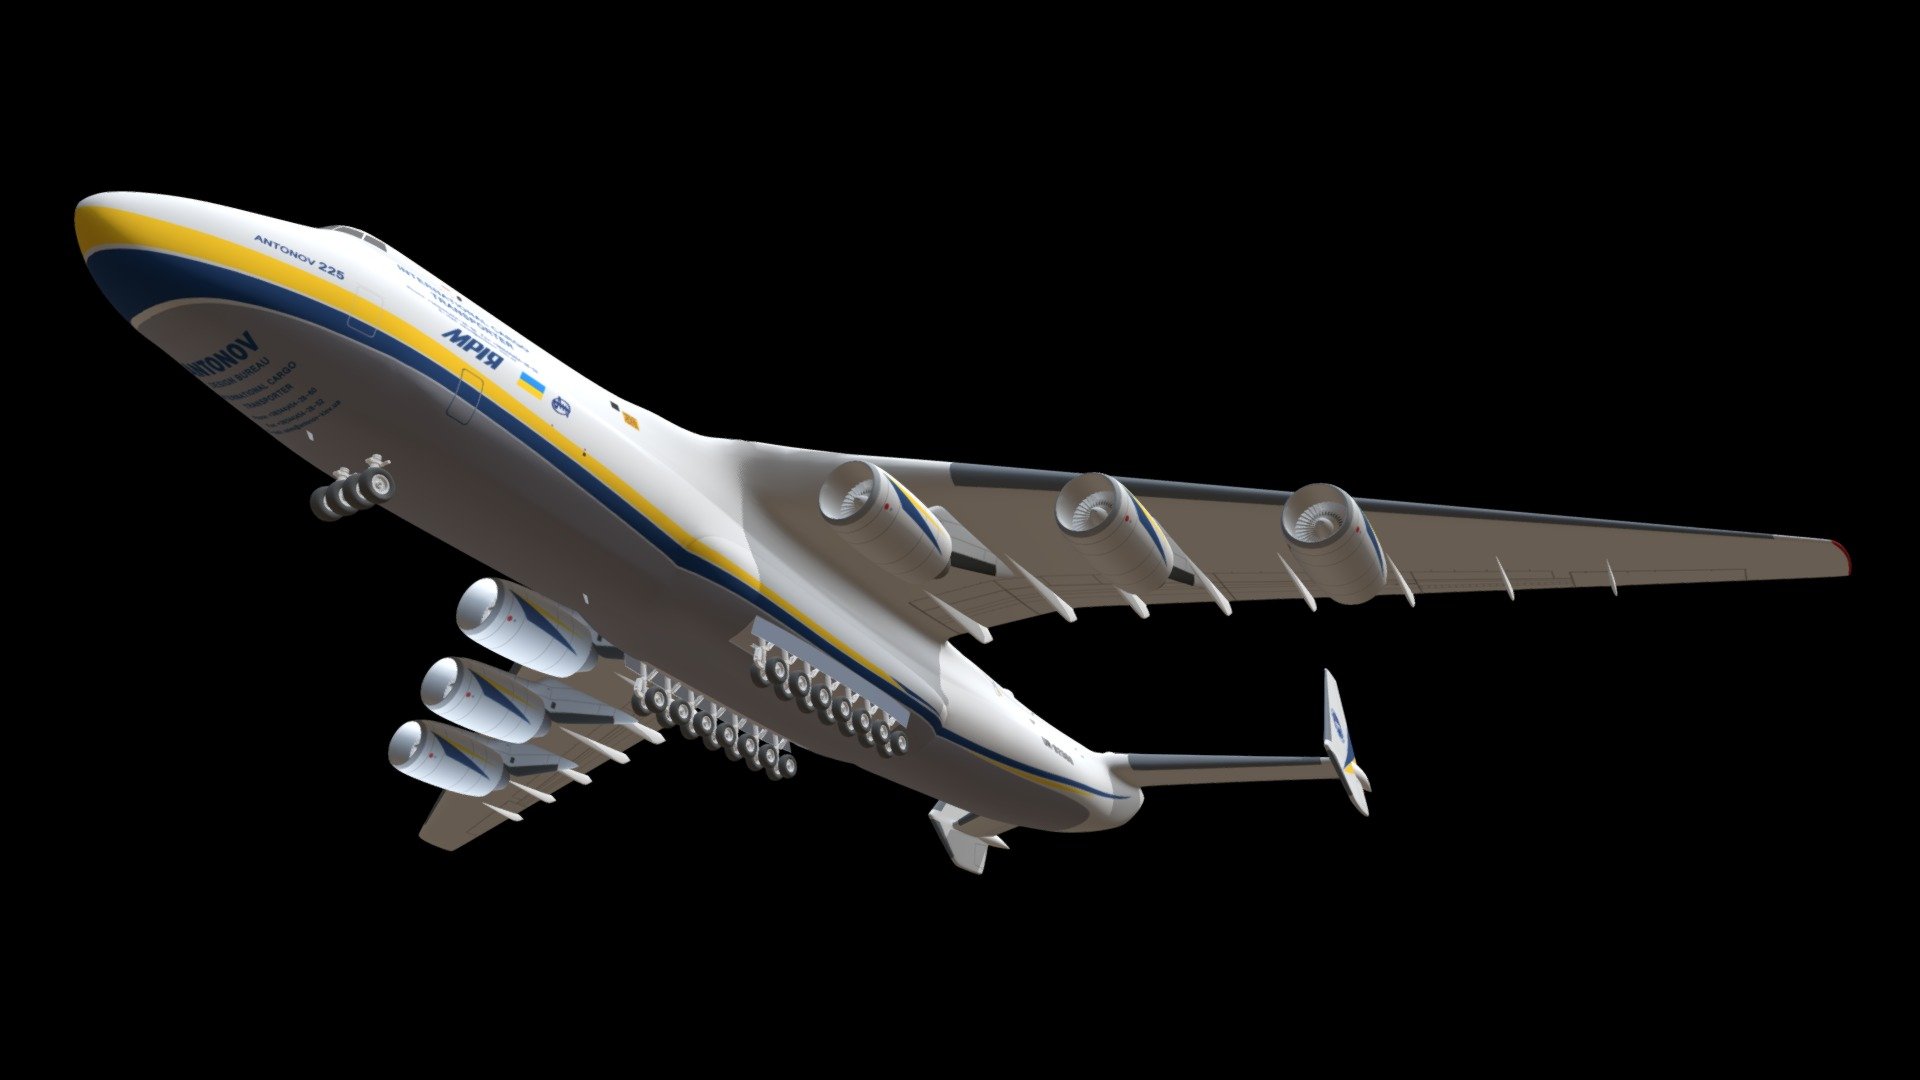 Quality 3d model of the Antonov An-225 Mriya, the world's largest and heaviest aircraft.

Included Formats:

3ds Max

Lightwave

Softimage

3DS

OBJ - Antonov An-225 Mriya - Buy Royalty Free 3D model by 3DHorse 3d model